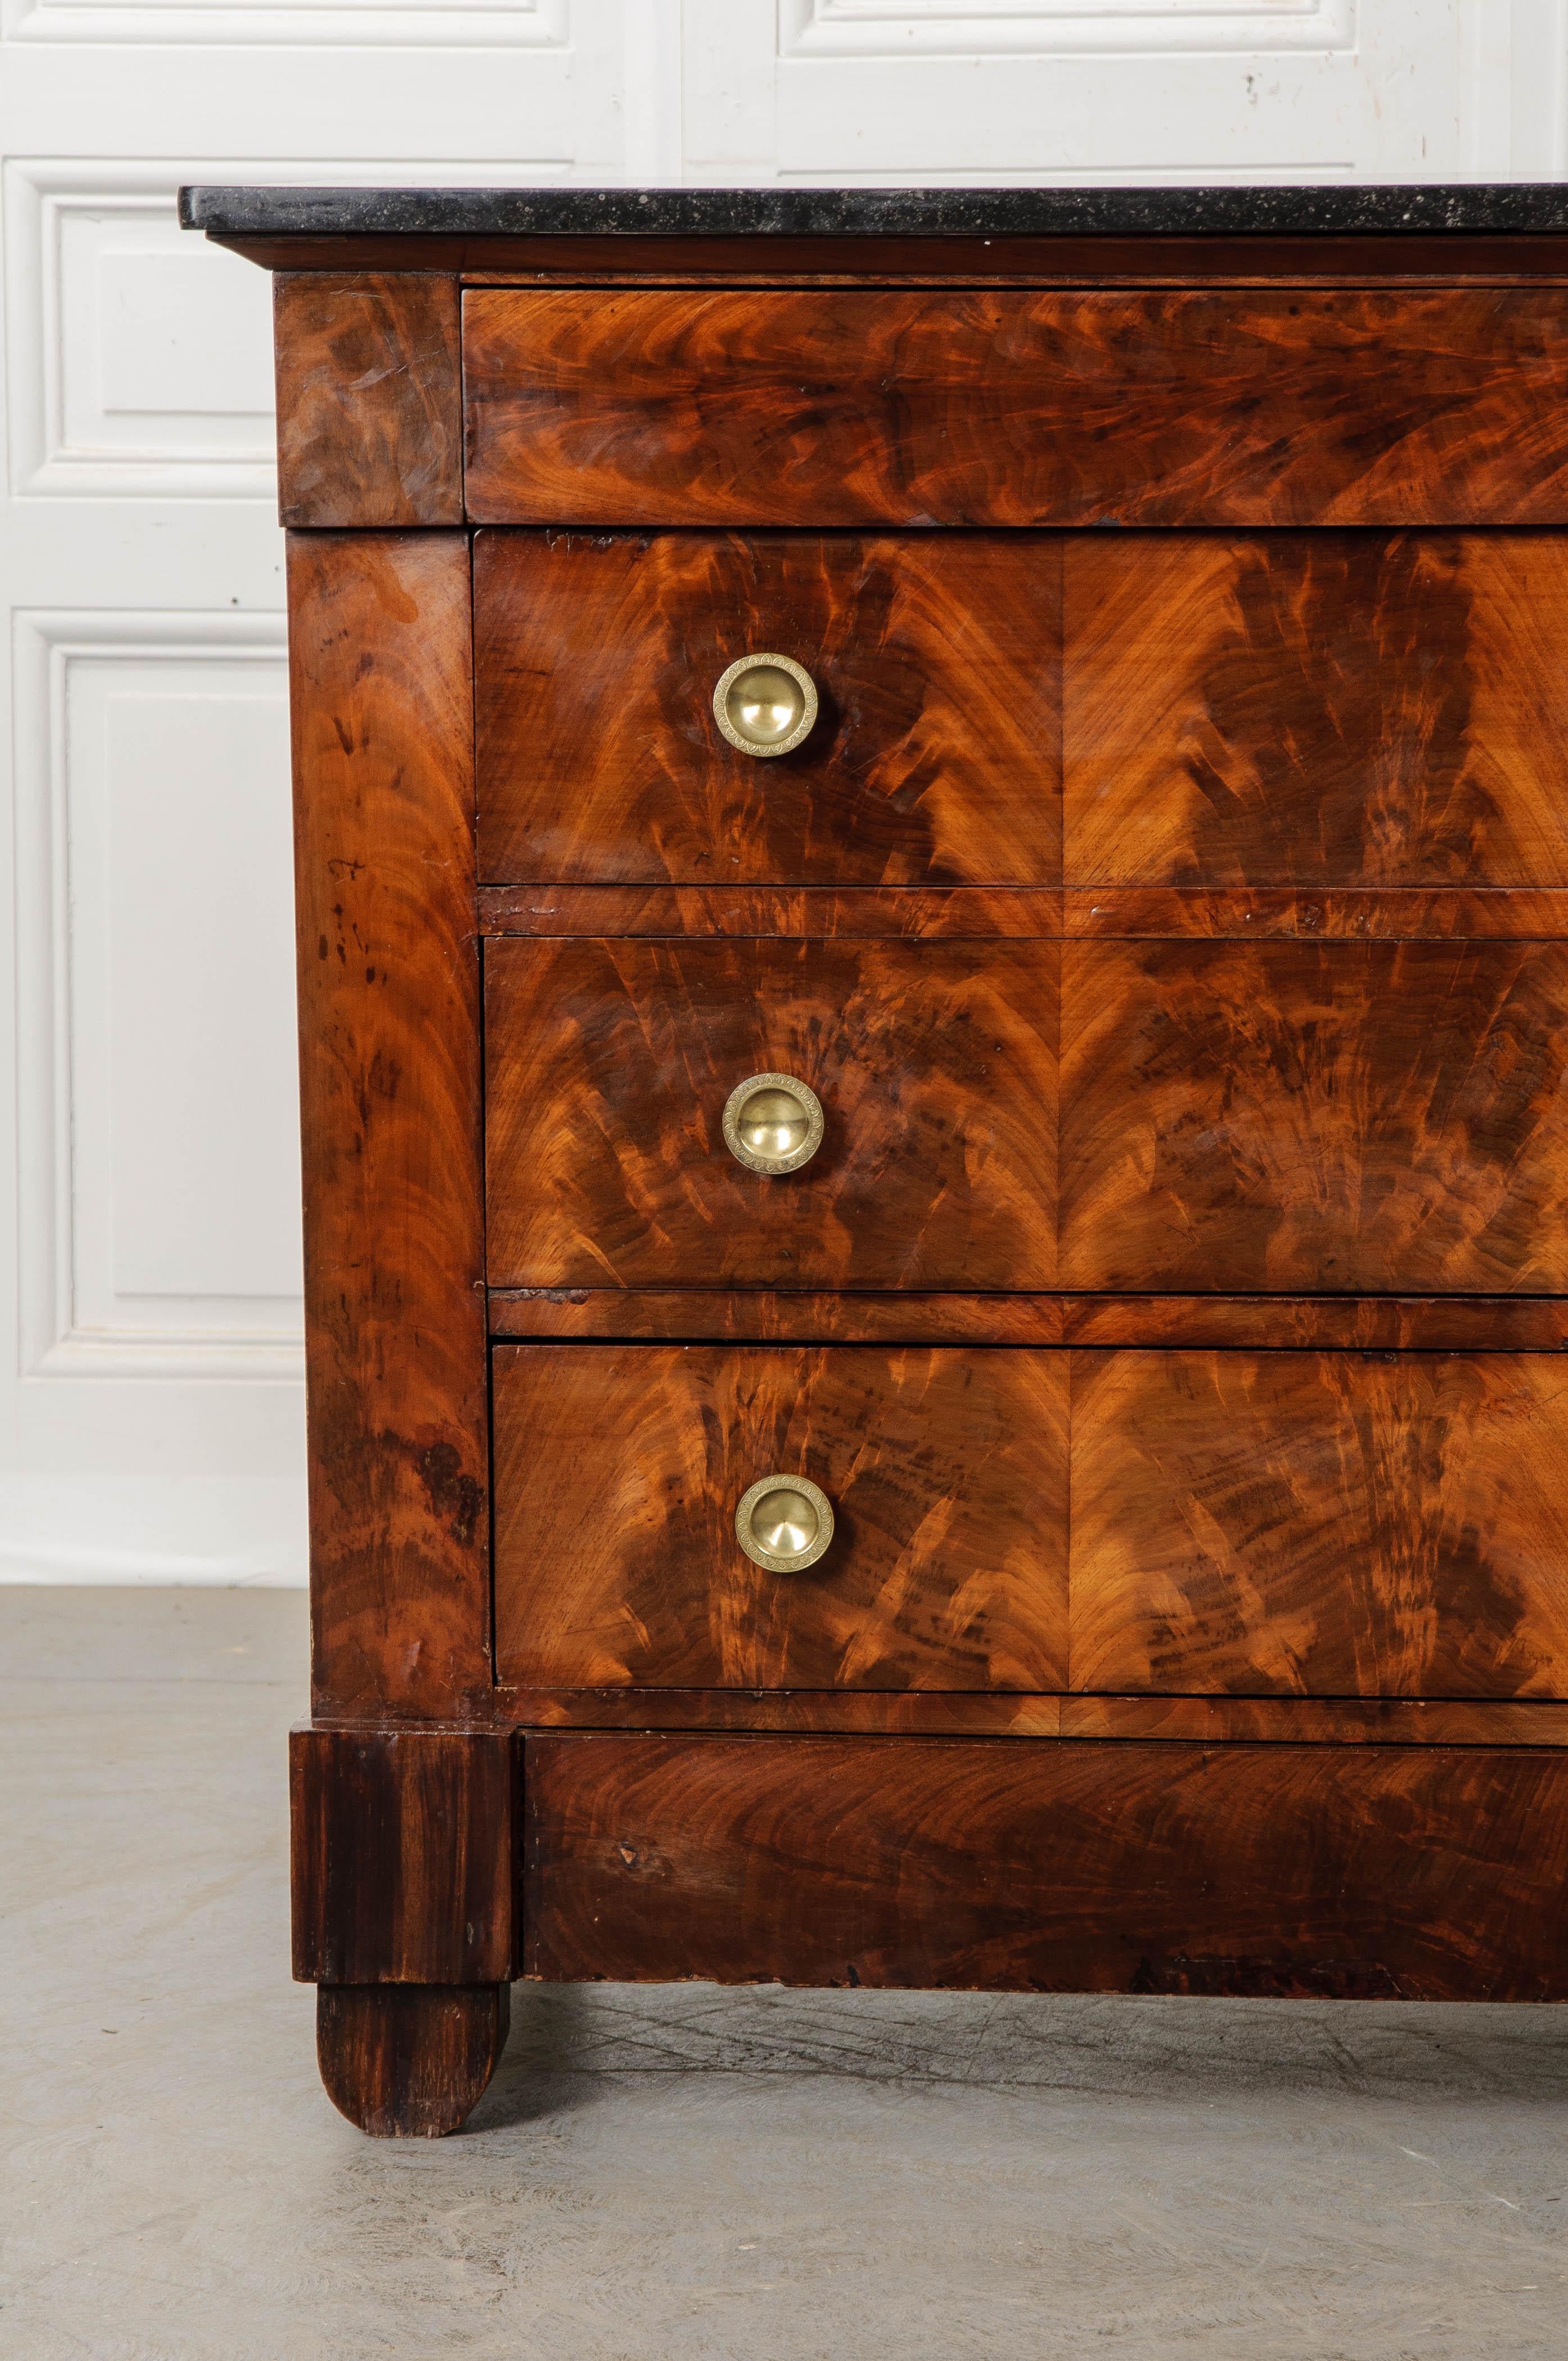 A magnificent mahogany commode, with four drawers, made in France, circa 1880. A piece of black fossil marble rests atop the case piece and is in good condition with few scratches. The commode has had its façade finished using wonderfully-marked